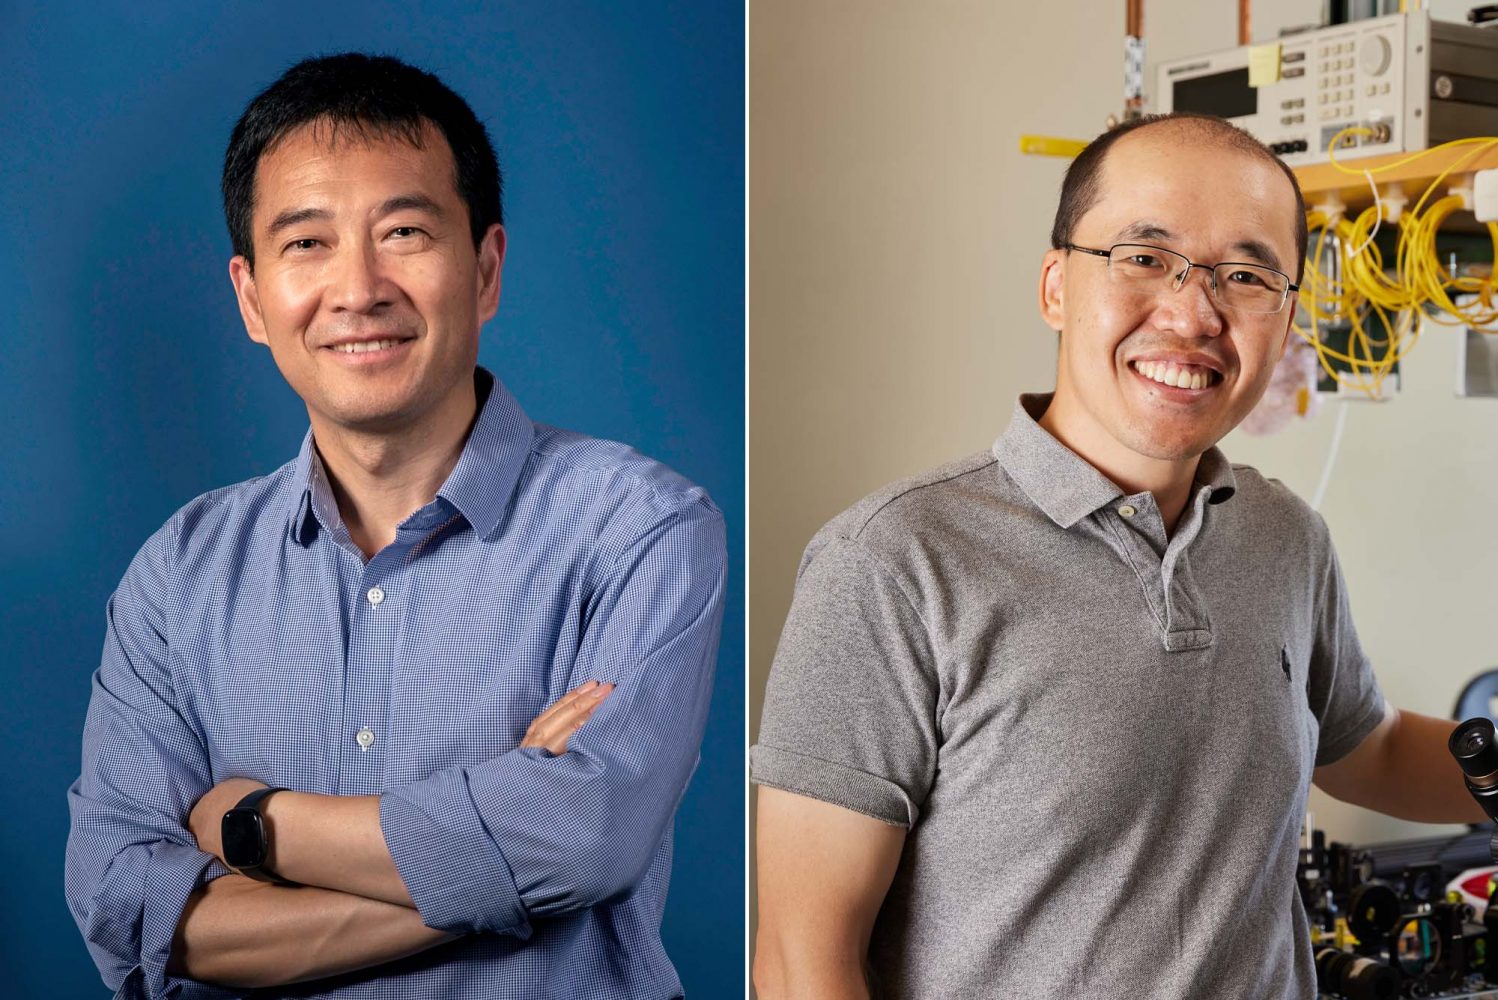 Collage: (left) Ji-Xin Cheng poses against a blue background. An Asian man wearing a light blue checkered collared shirt smiles and poses with arms crossed. (right) Lei Tian stands and poses in his lab. An Asian man wearing glasses and a gray collared shirt smiles and poses with one arm resting on top of a microscope.